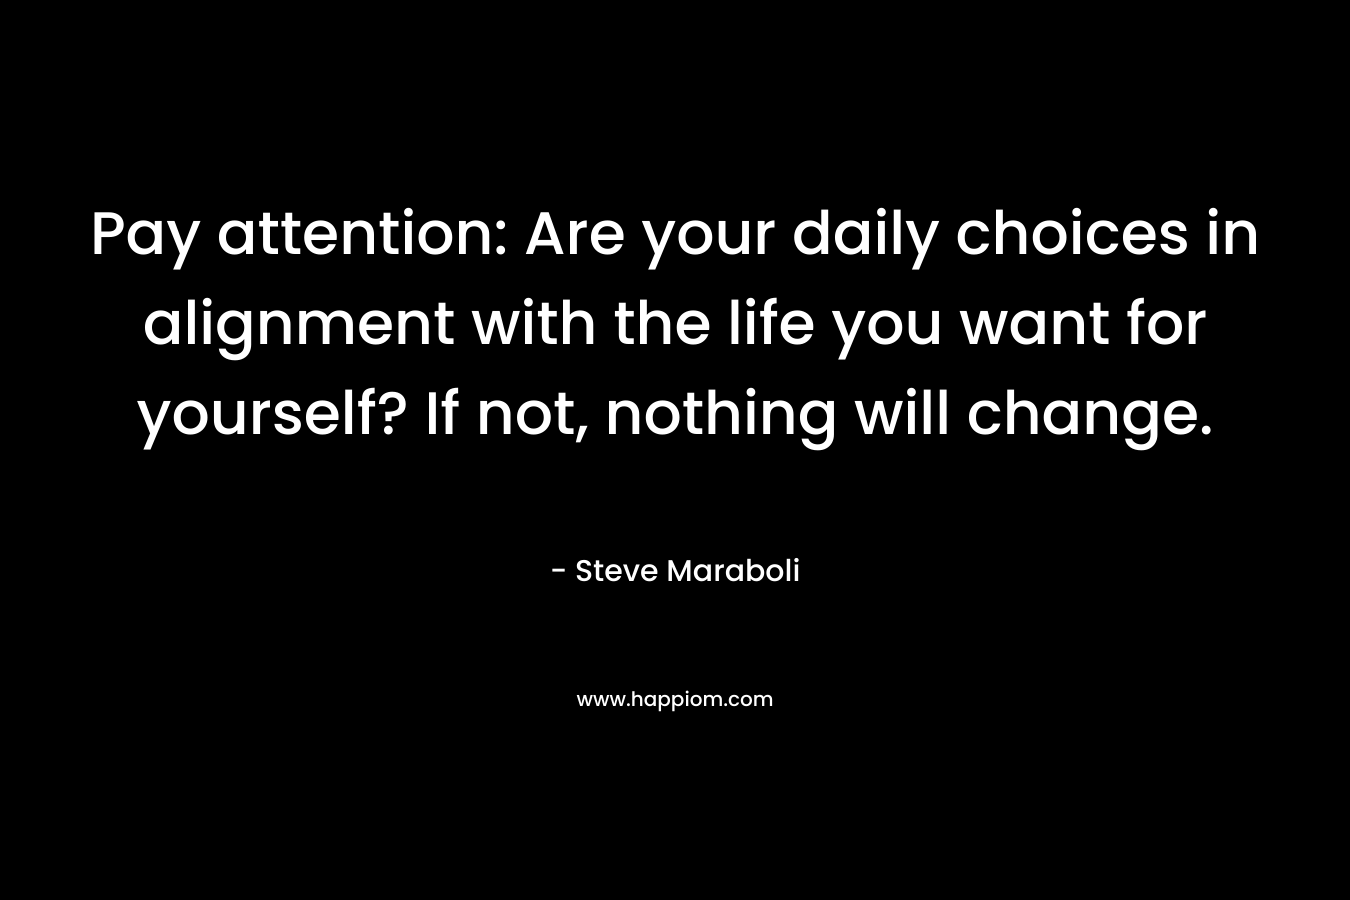 Pay attention: Are your daily choices in alignment with the life you want for yourself? If not, nothing will change.